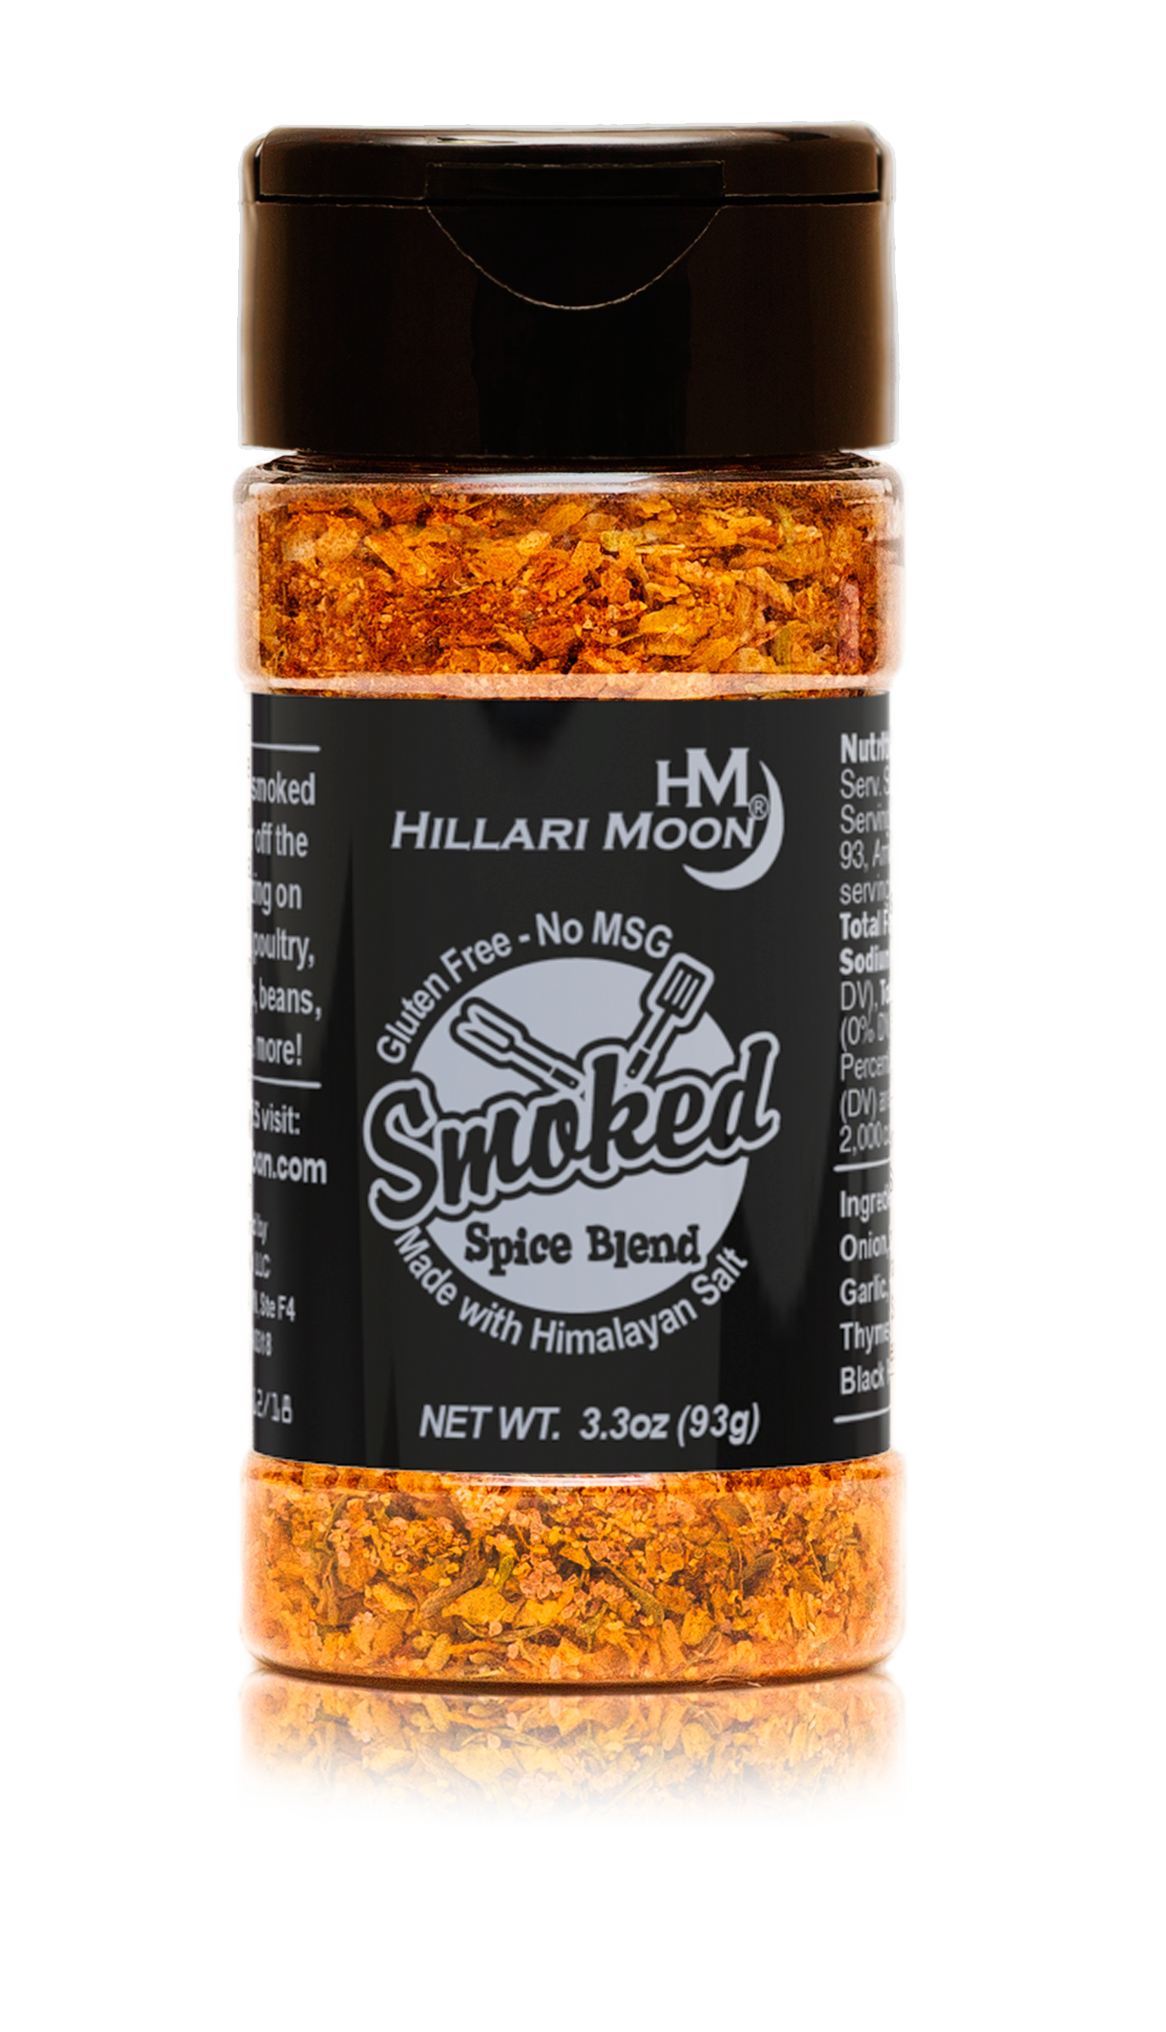 Smoked Spice Blend